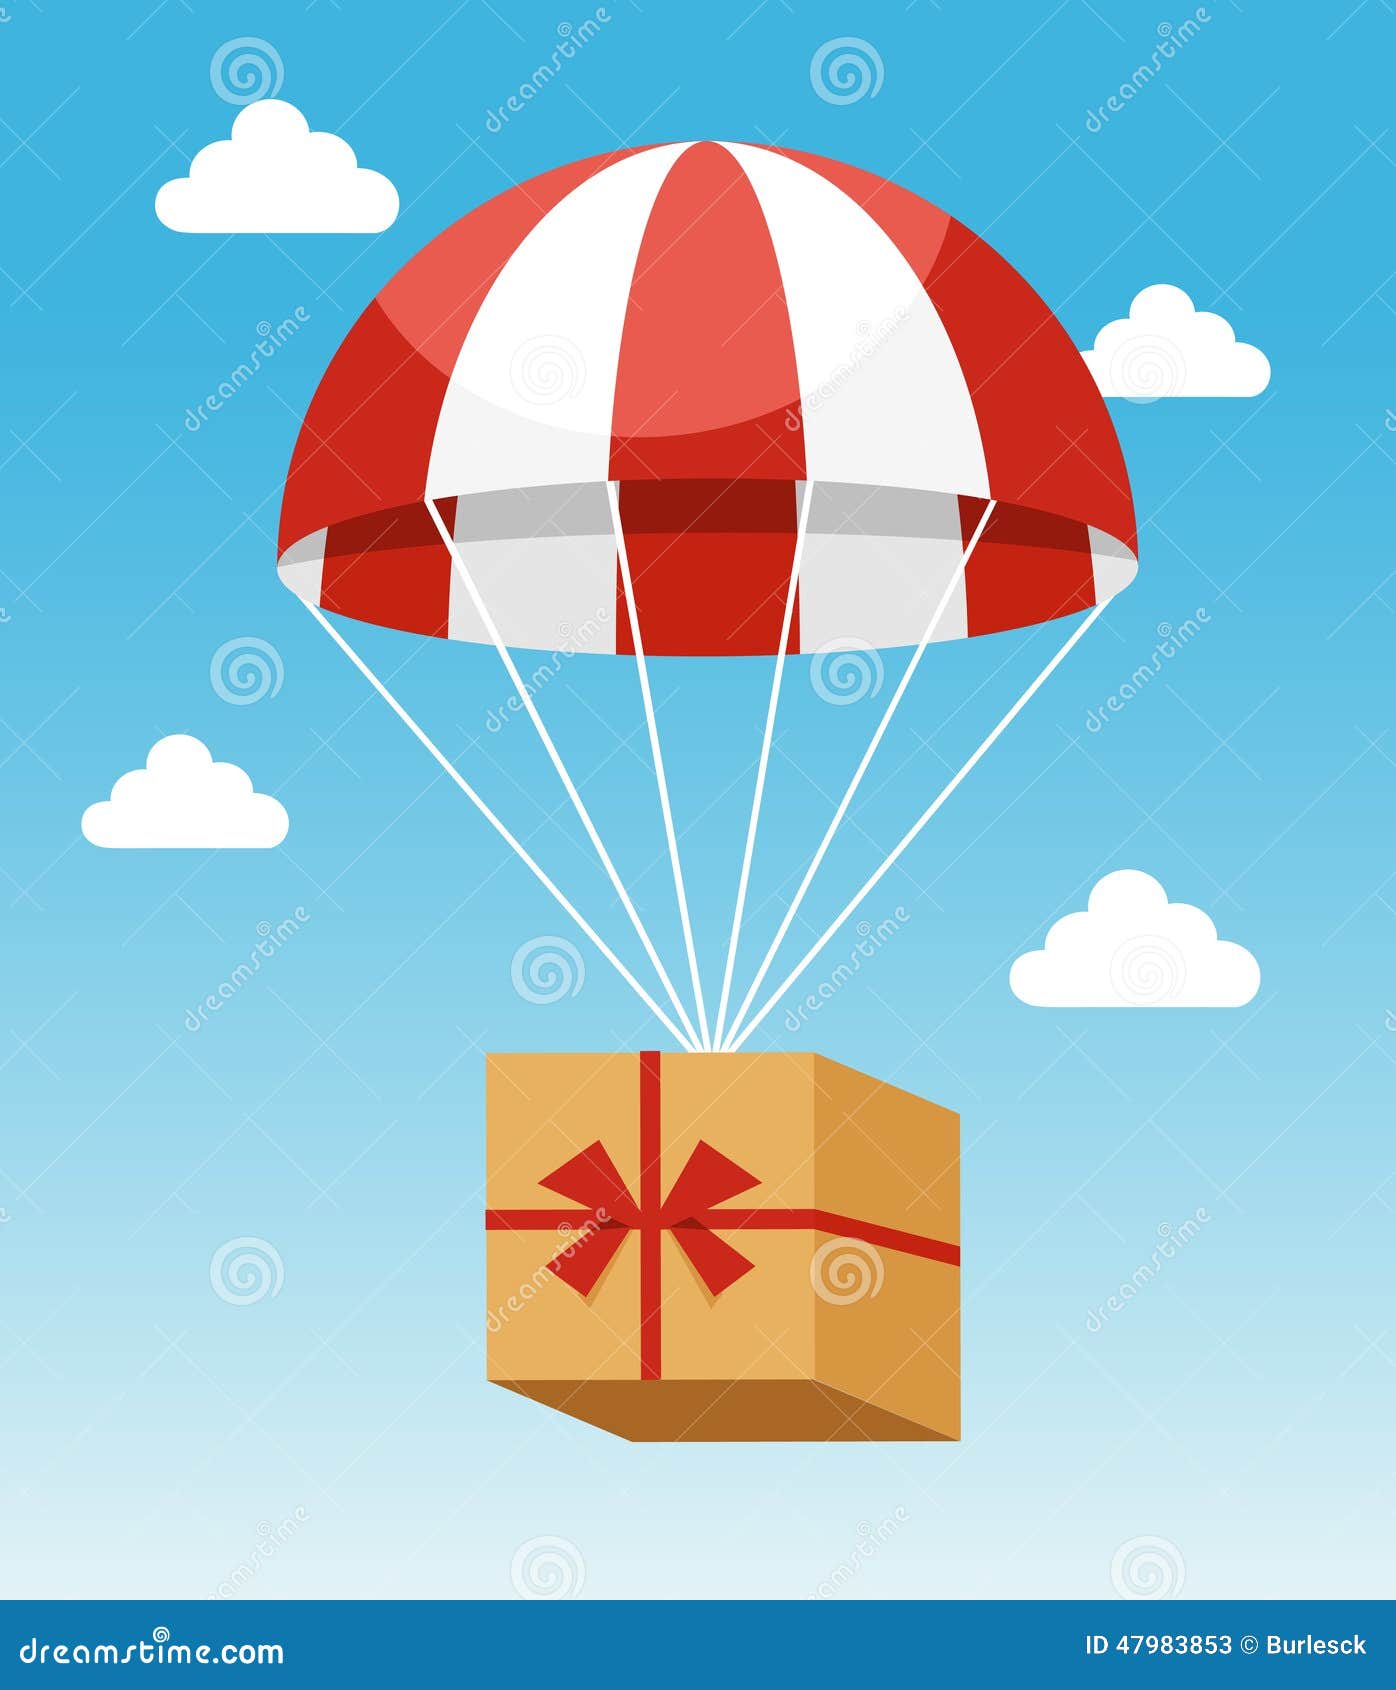 red and white parachute holding delivery box